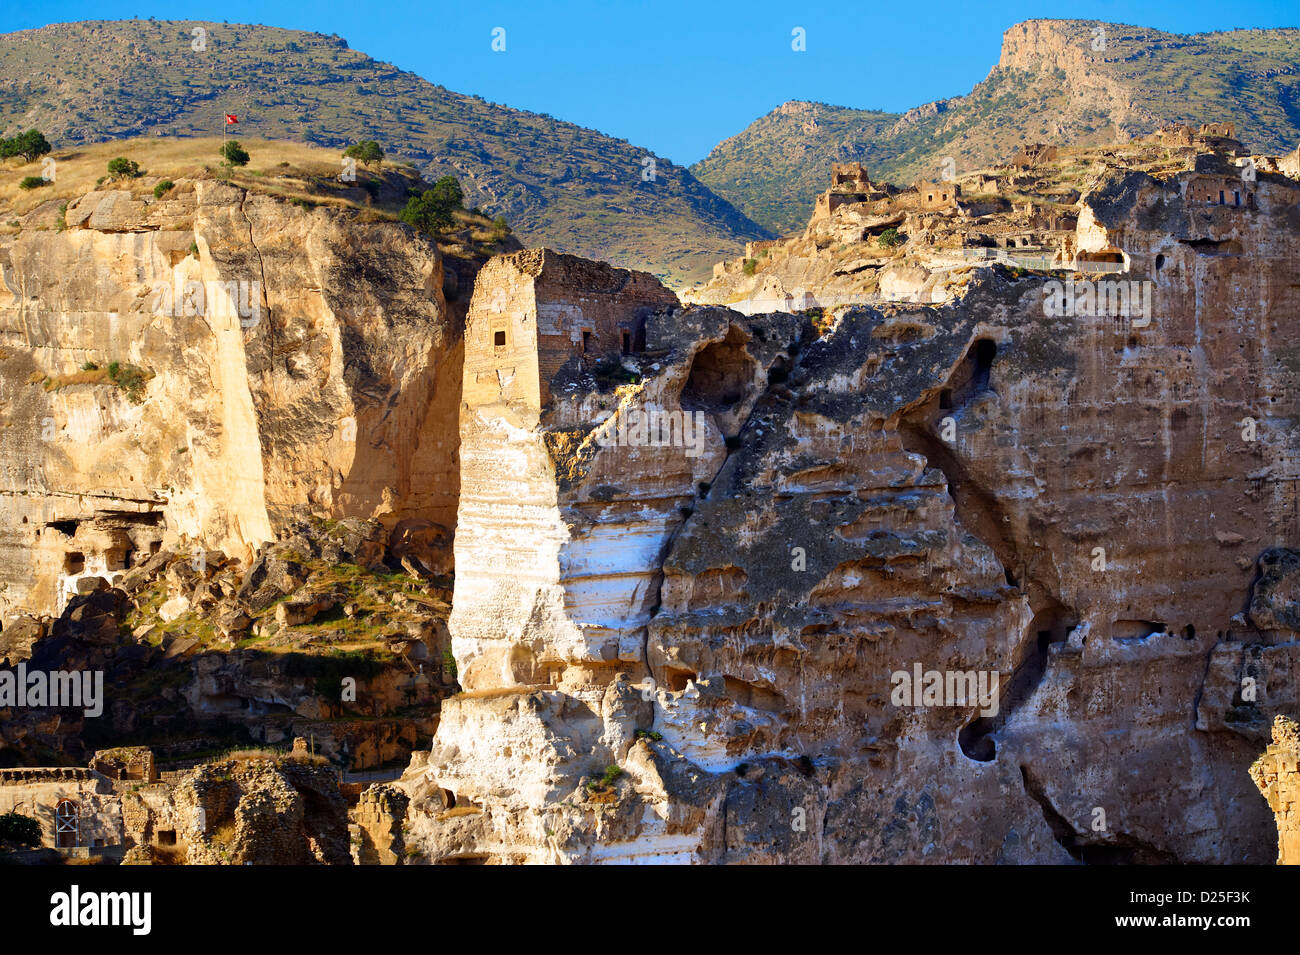 Ruins of the Ayyubids Small Palace in the citadel of ancient Hasankeyf overlooking the Tigris River. Turkey 15 Stock Photo